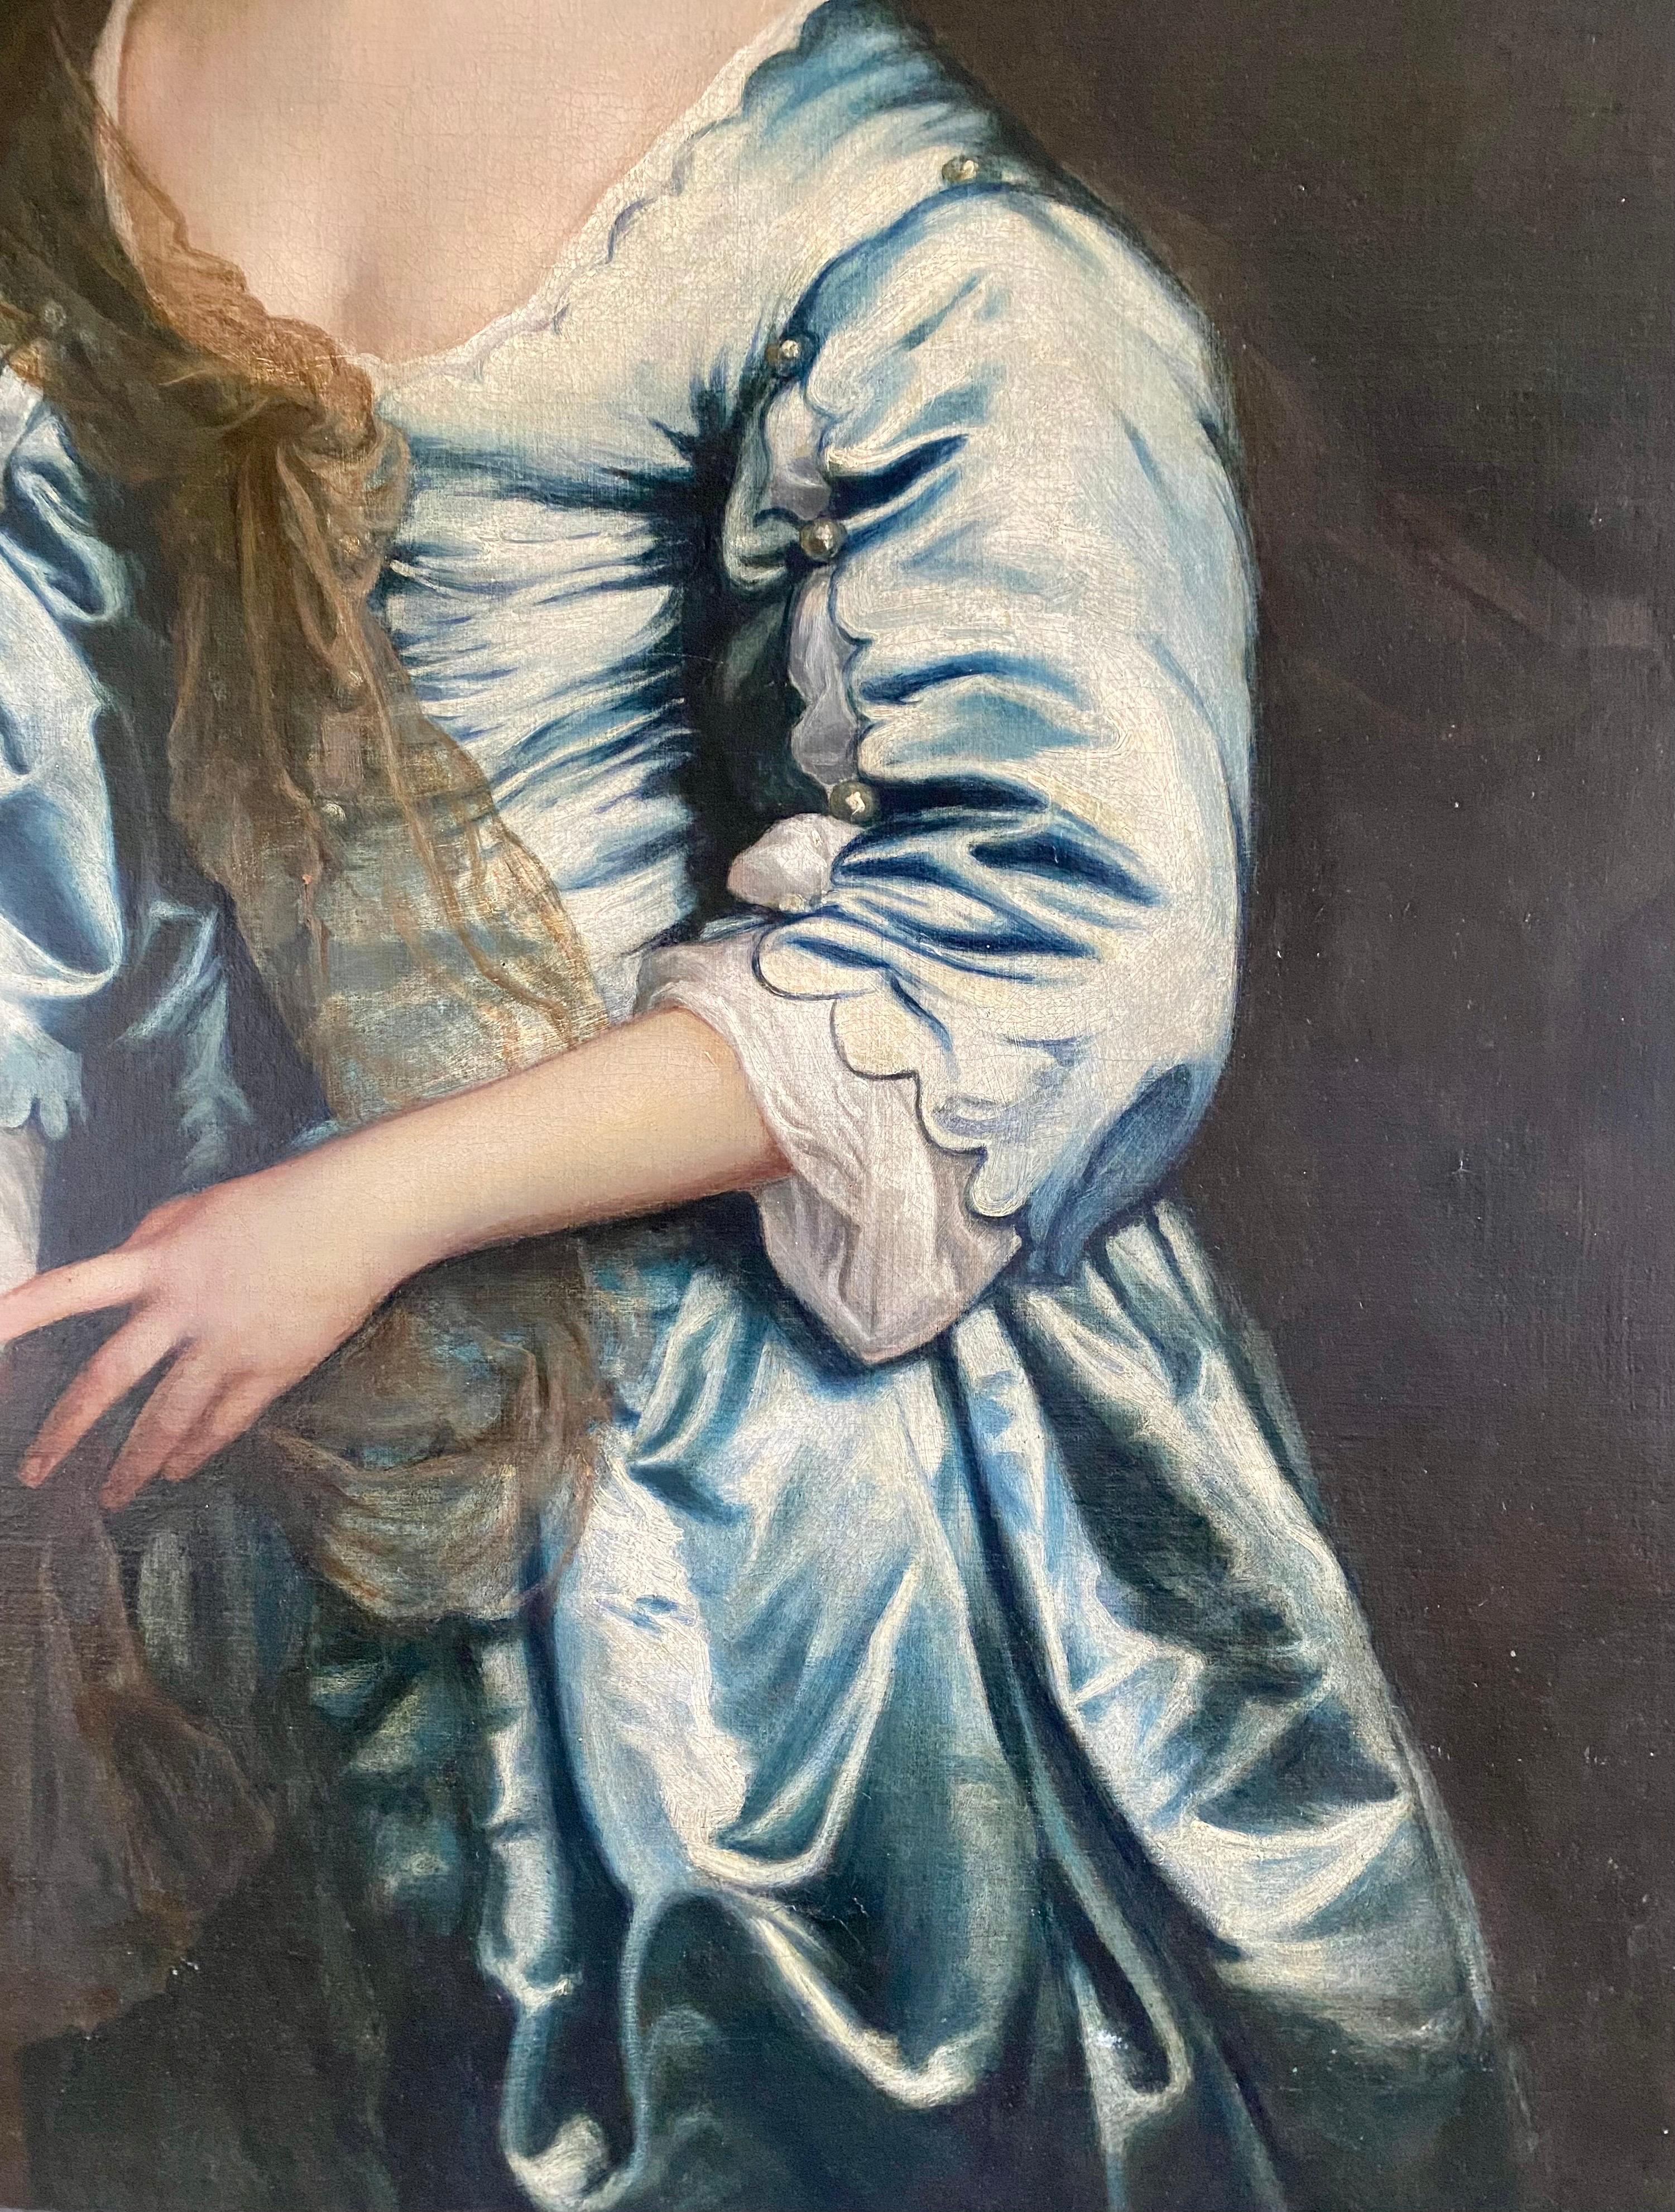  17th century portrait of Lady Anne Berney of Park Hall, Norfolk - Painting by Anthony Van Dyck